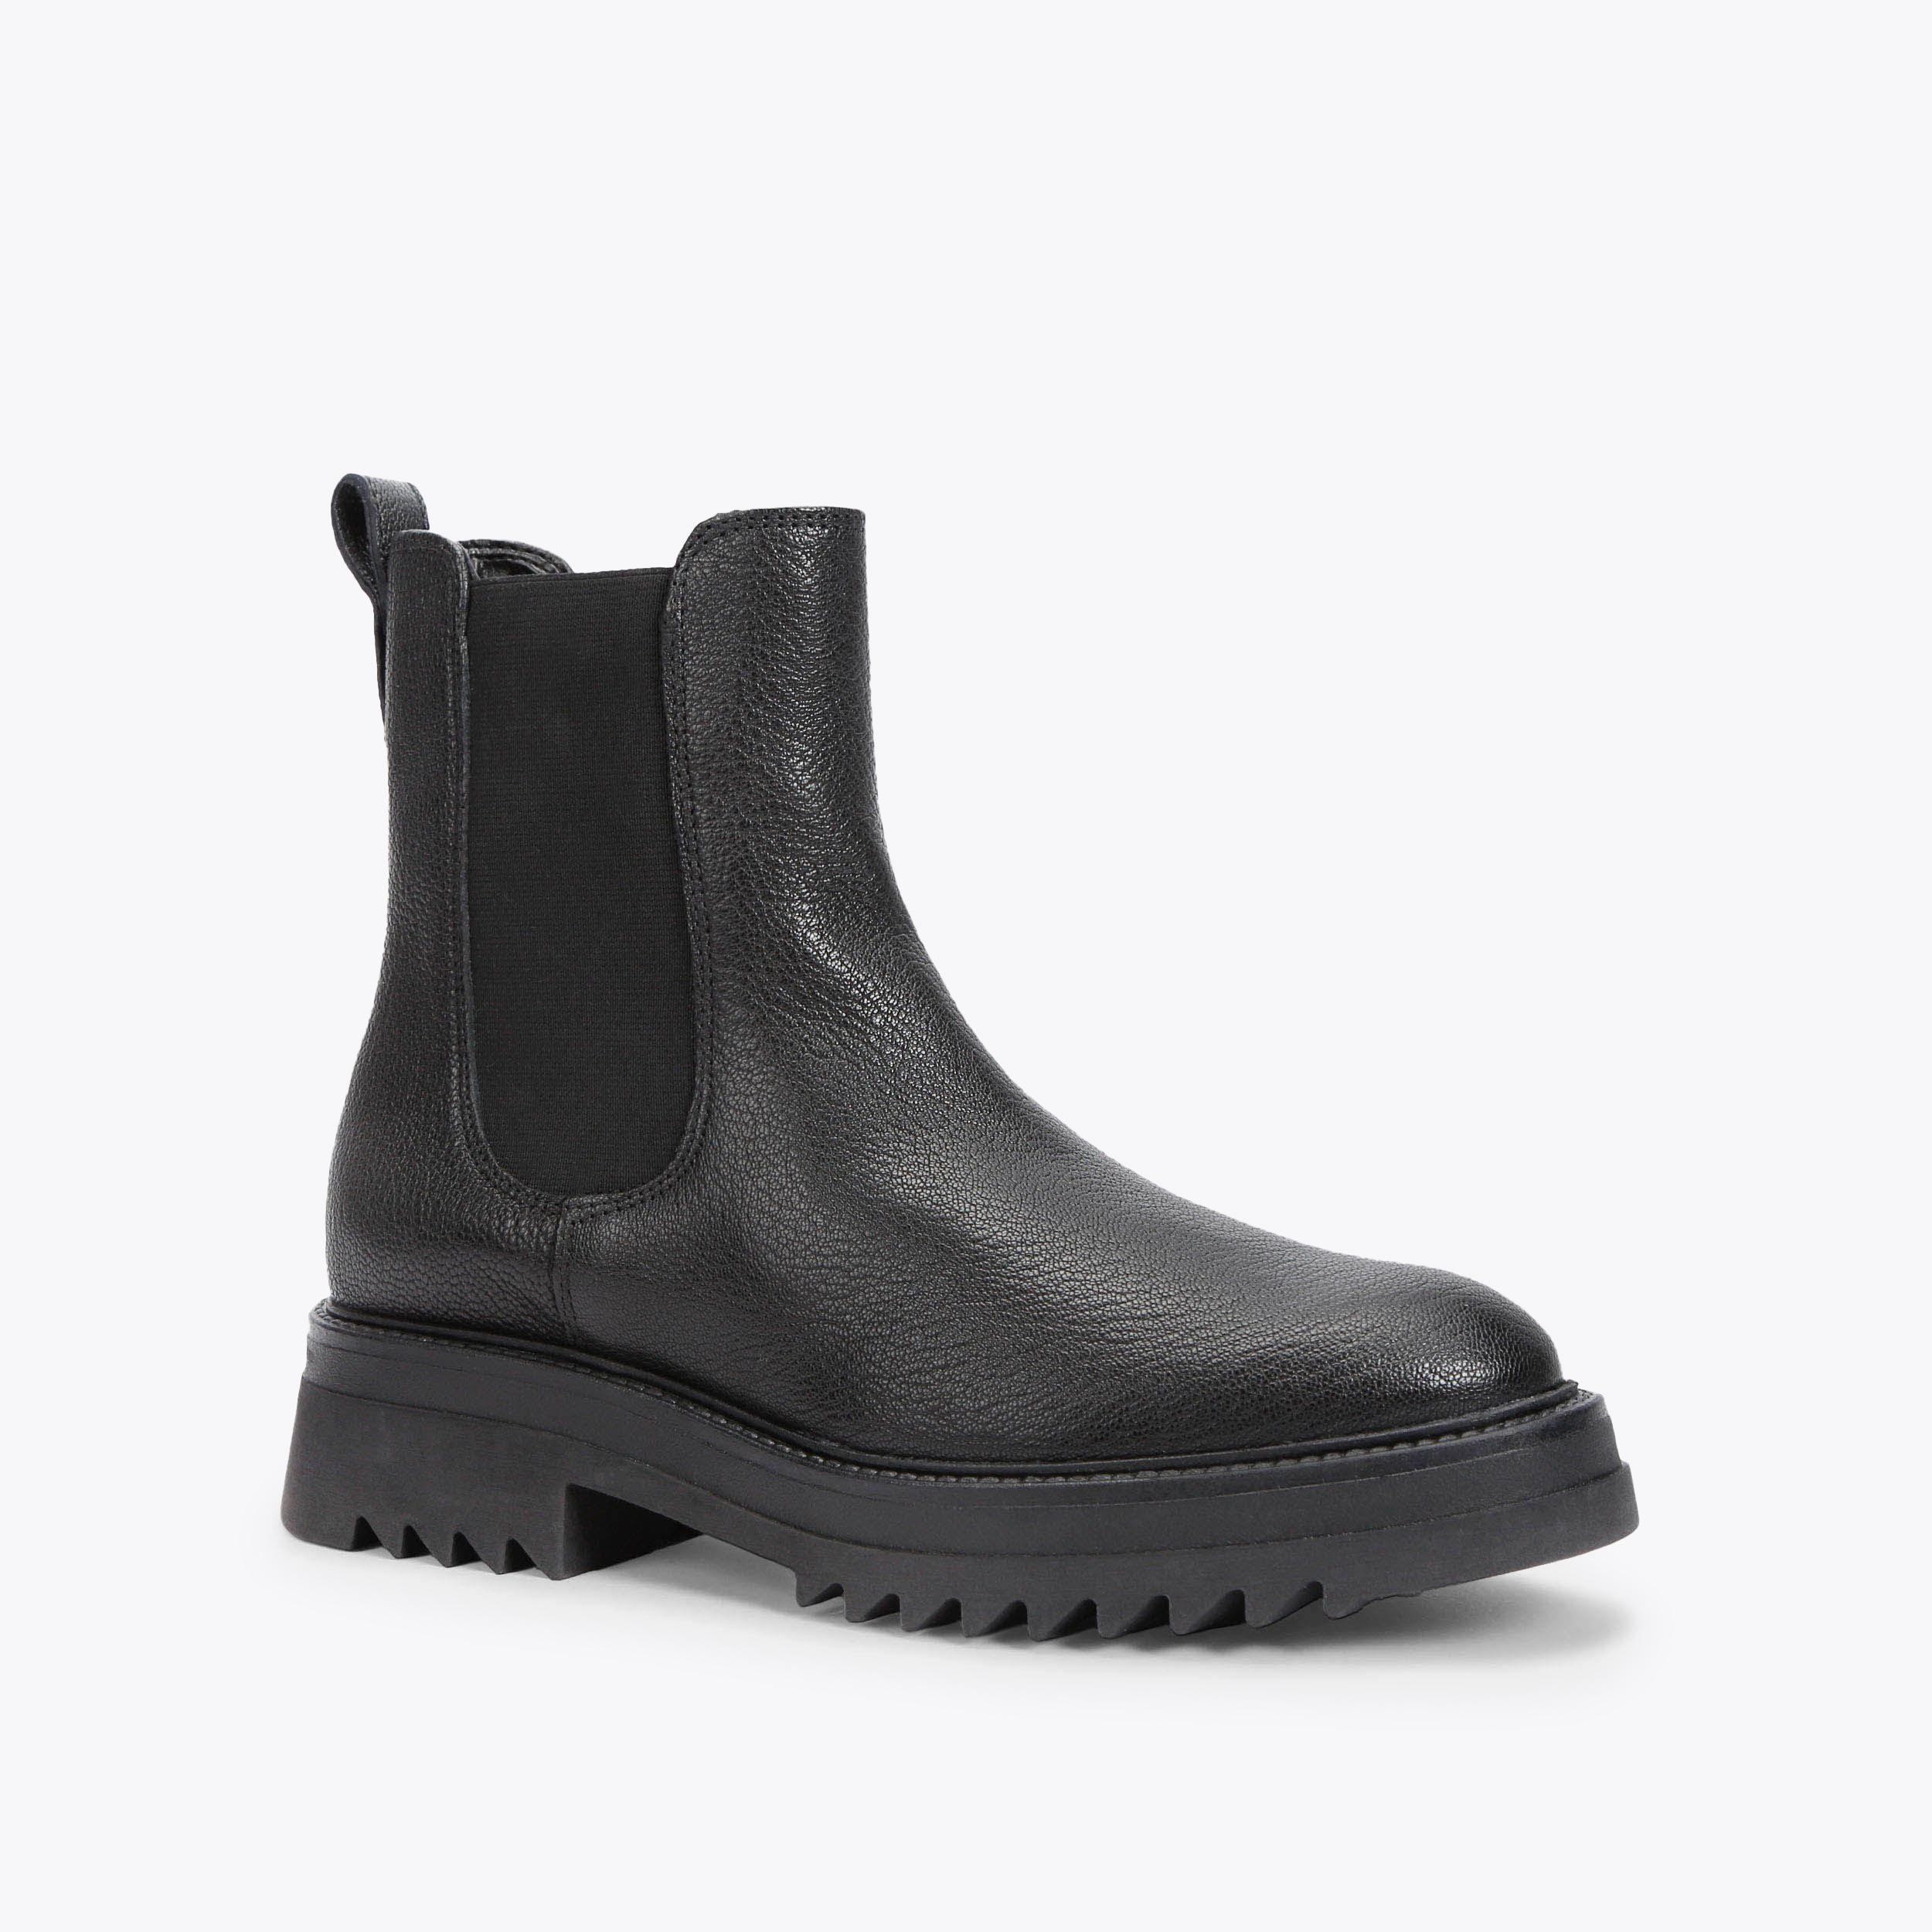 STRONG Black Leather Chunky Sole Chelsea Boots by CARVELA